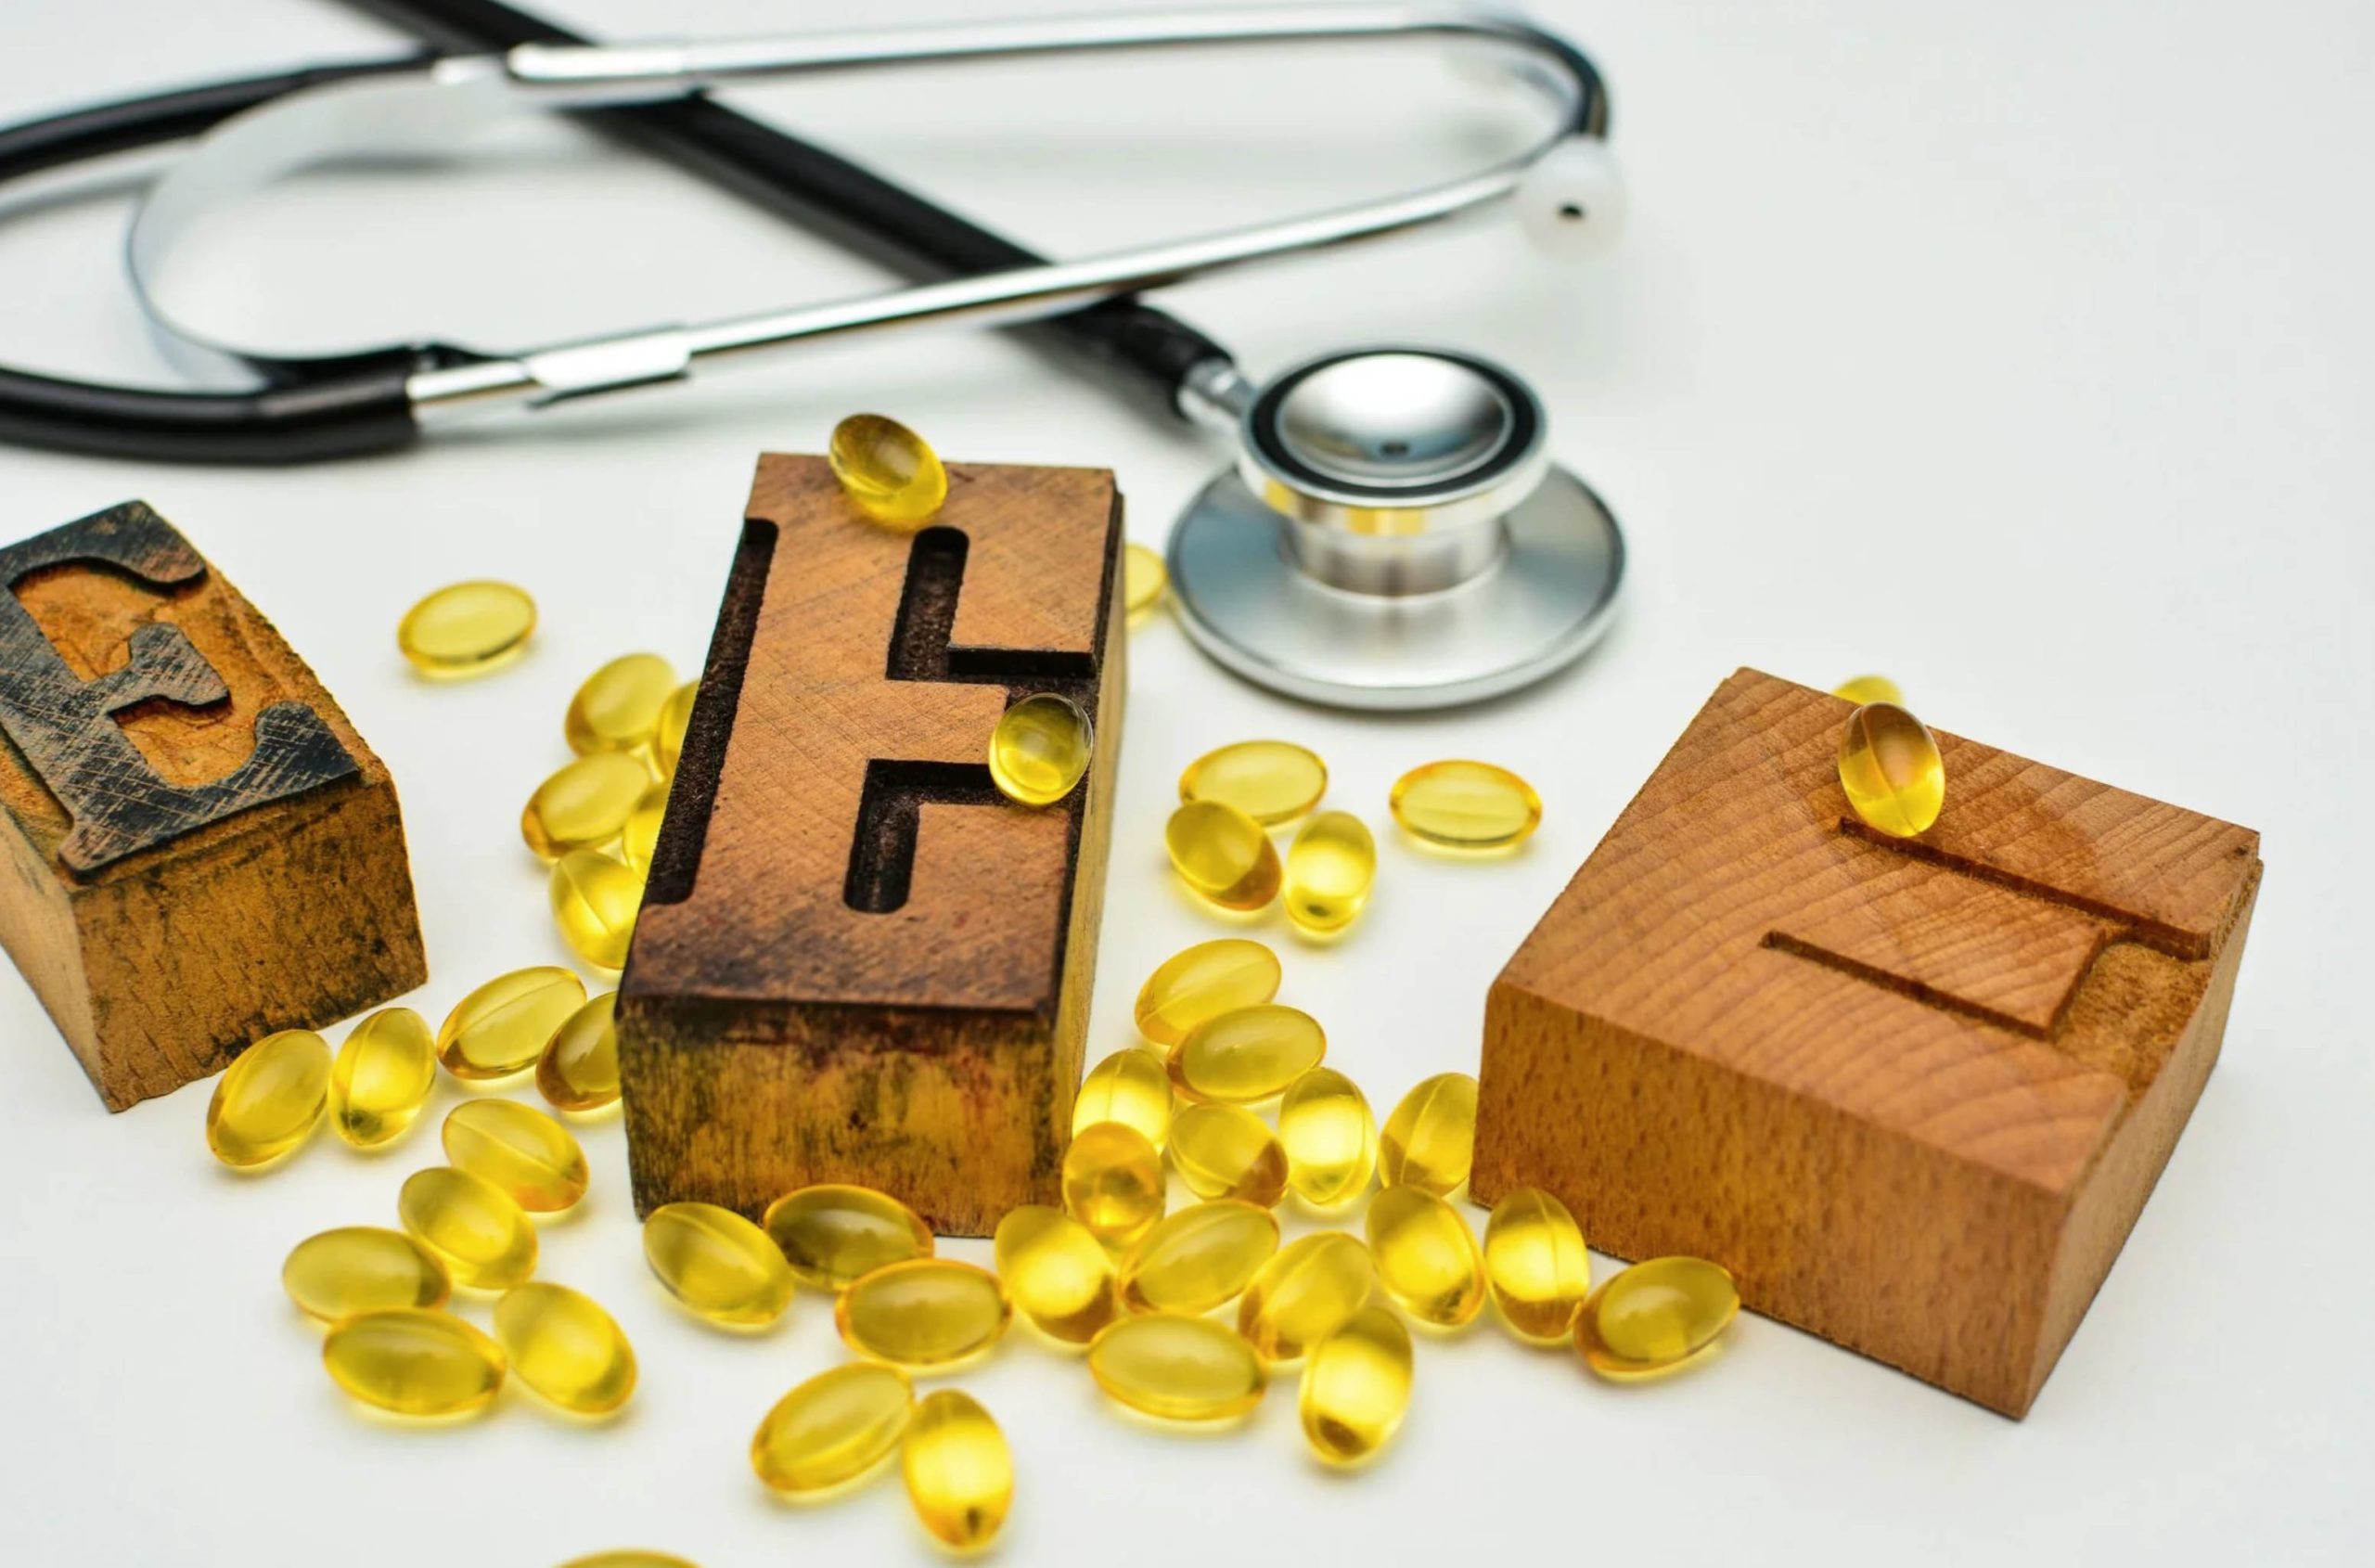 ACGrace - Vitamin e capsules and a stethoscope on a wooden block.